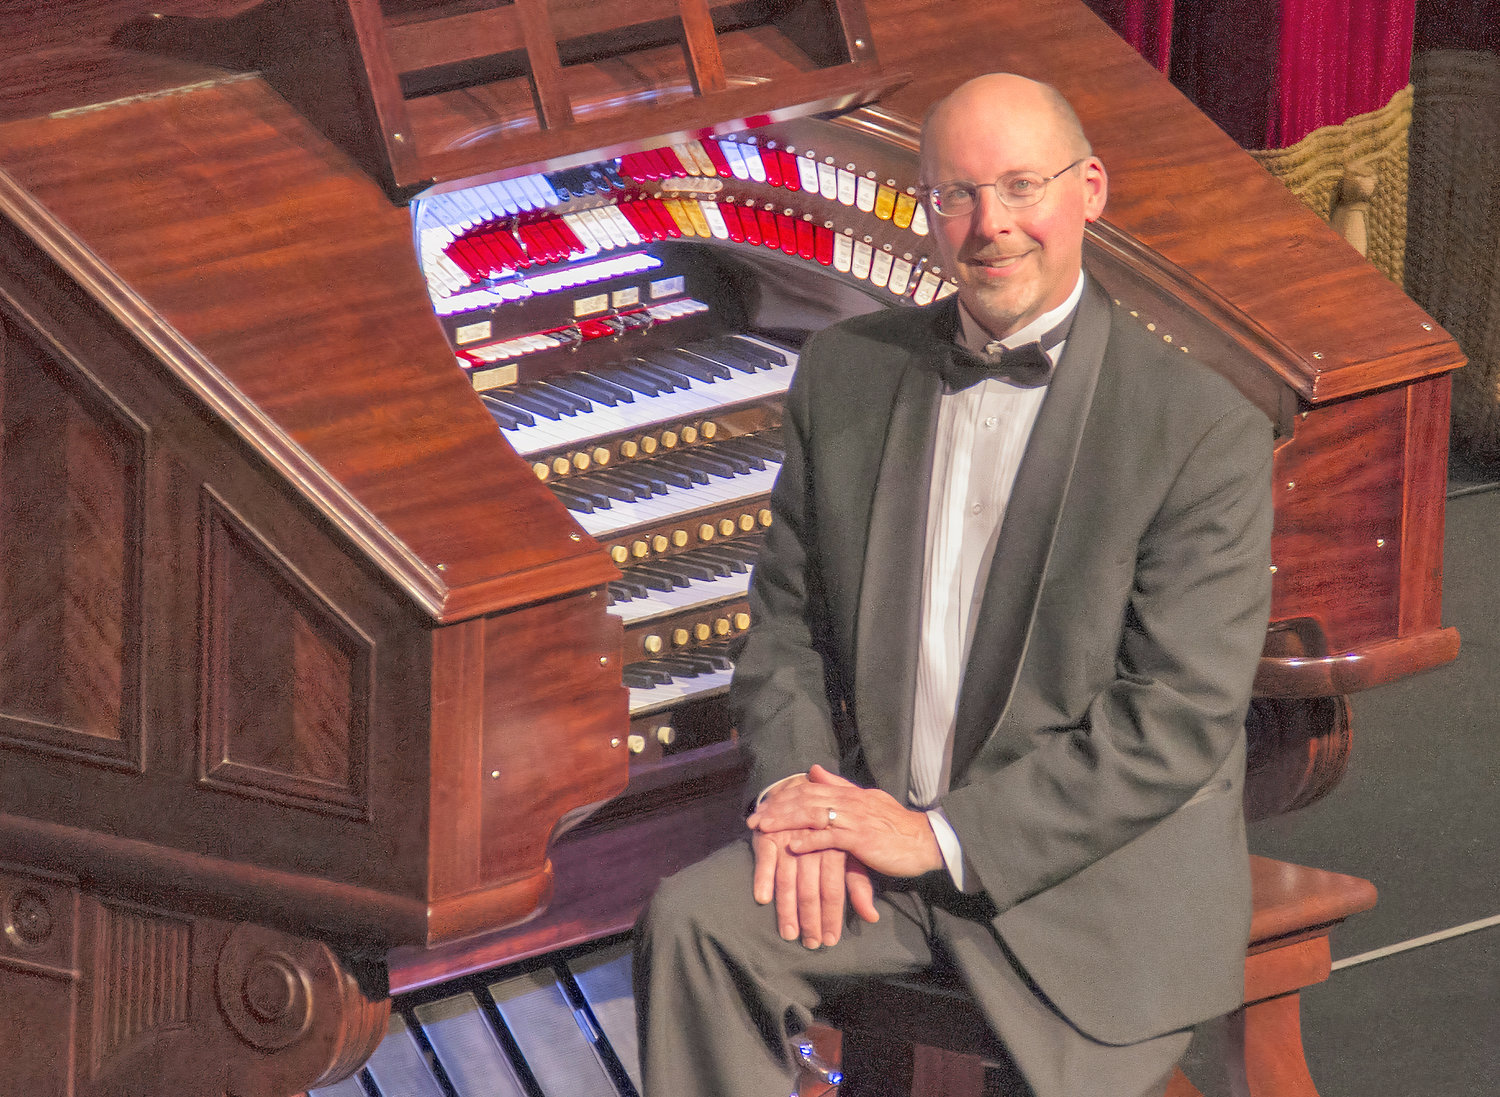 AT THE KEYS — Organist David Peckham will accompany two silent films to be shown at the Capitol Theatre on the night of Saturday, Jan. 15 in celebration of the completion of theatre renovations as part of the Downtown Revitalization Project that includes a new marquee and blade sign outside the Capitol.